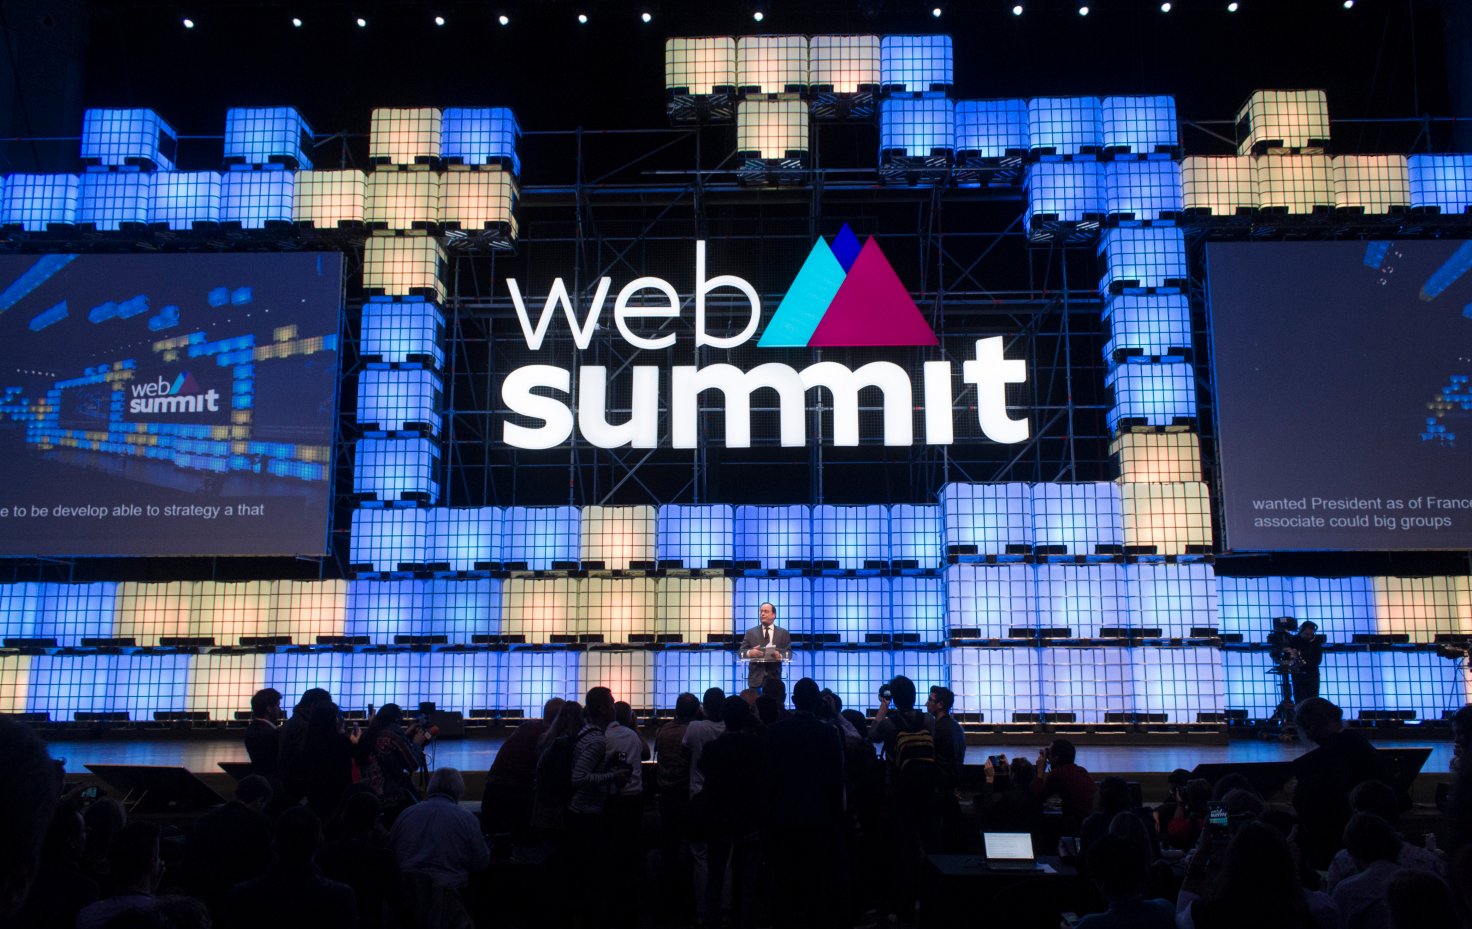 Europe’s biggest technology conference, Web Summit, will be hosted